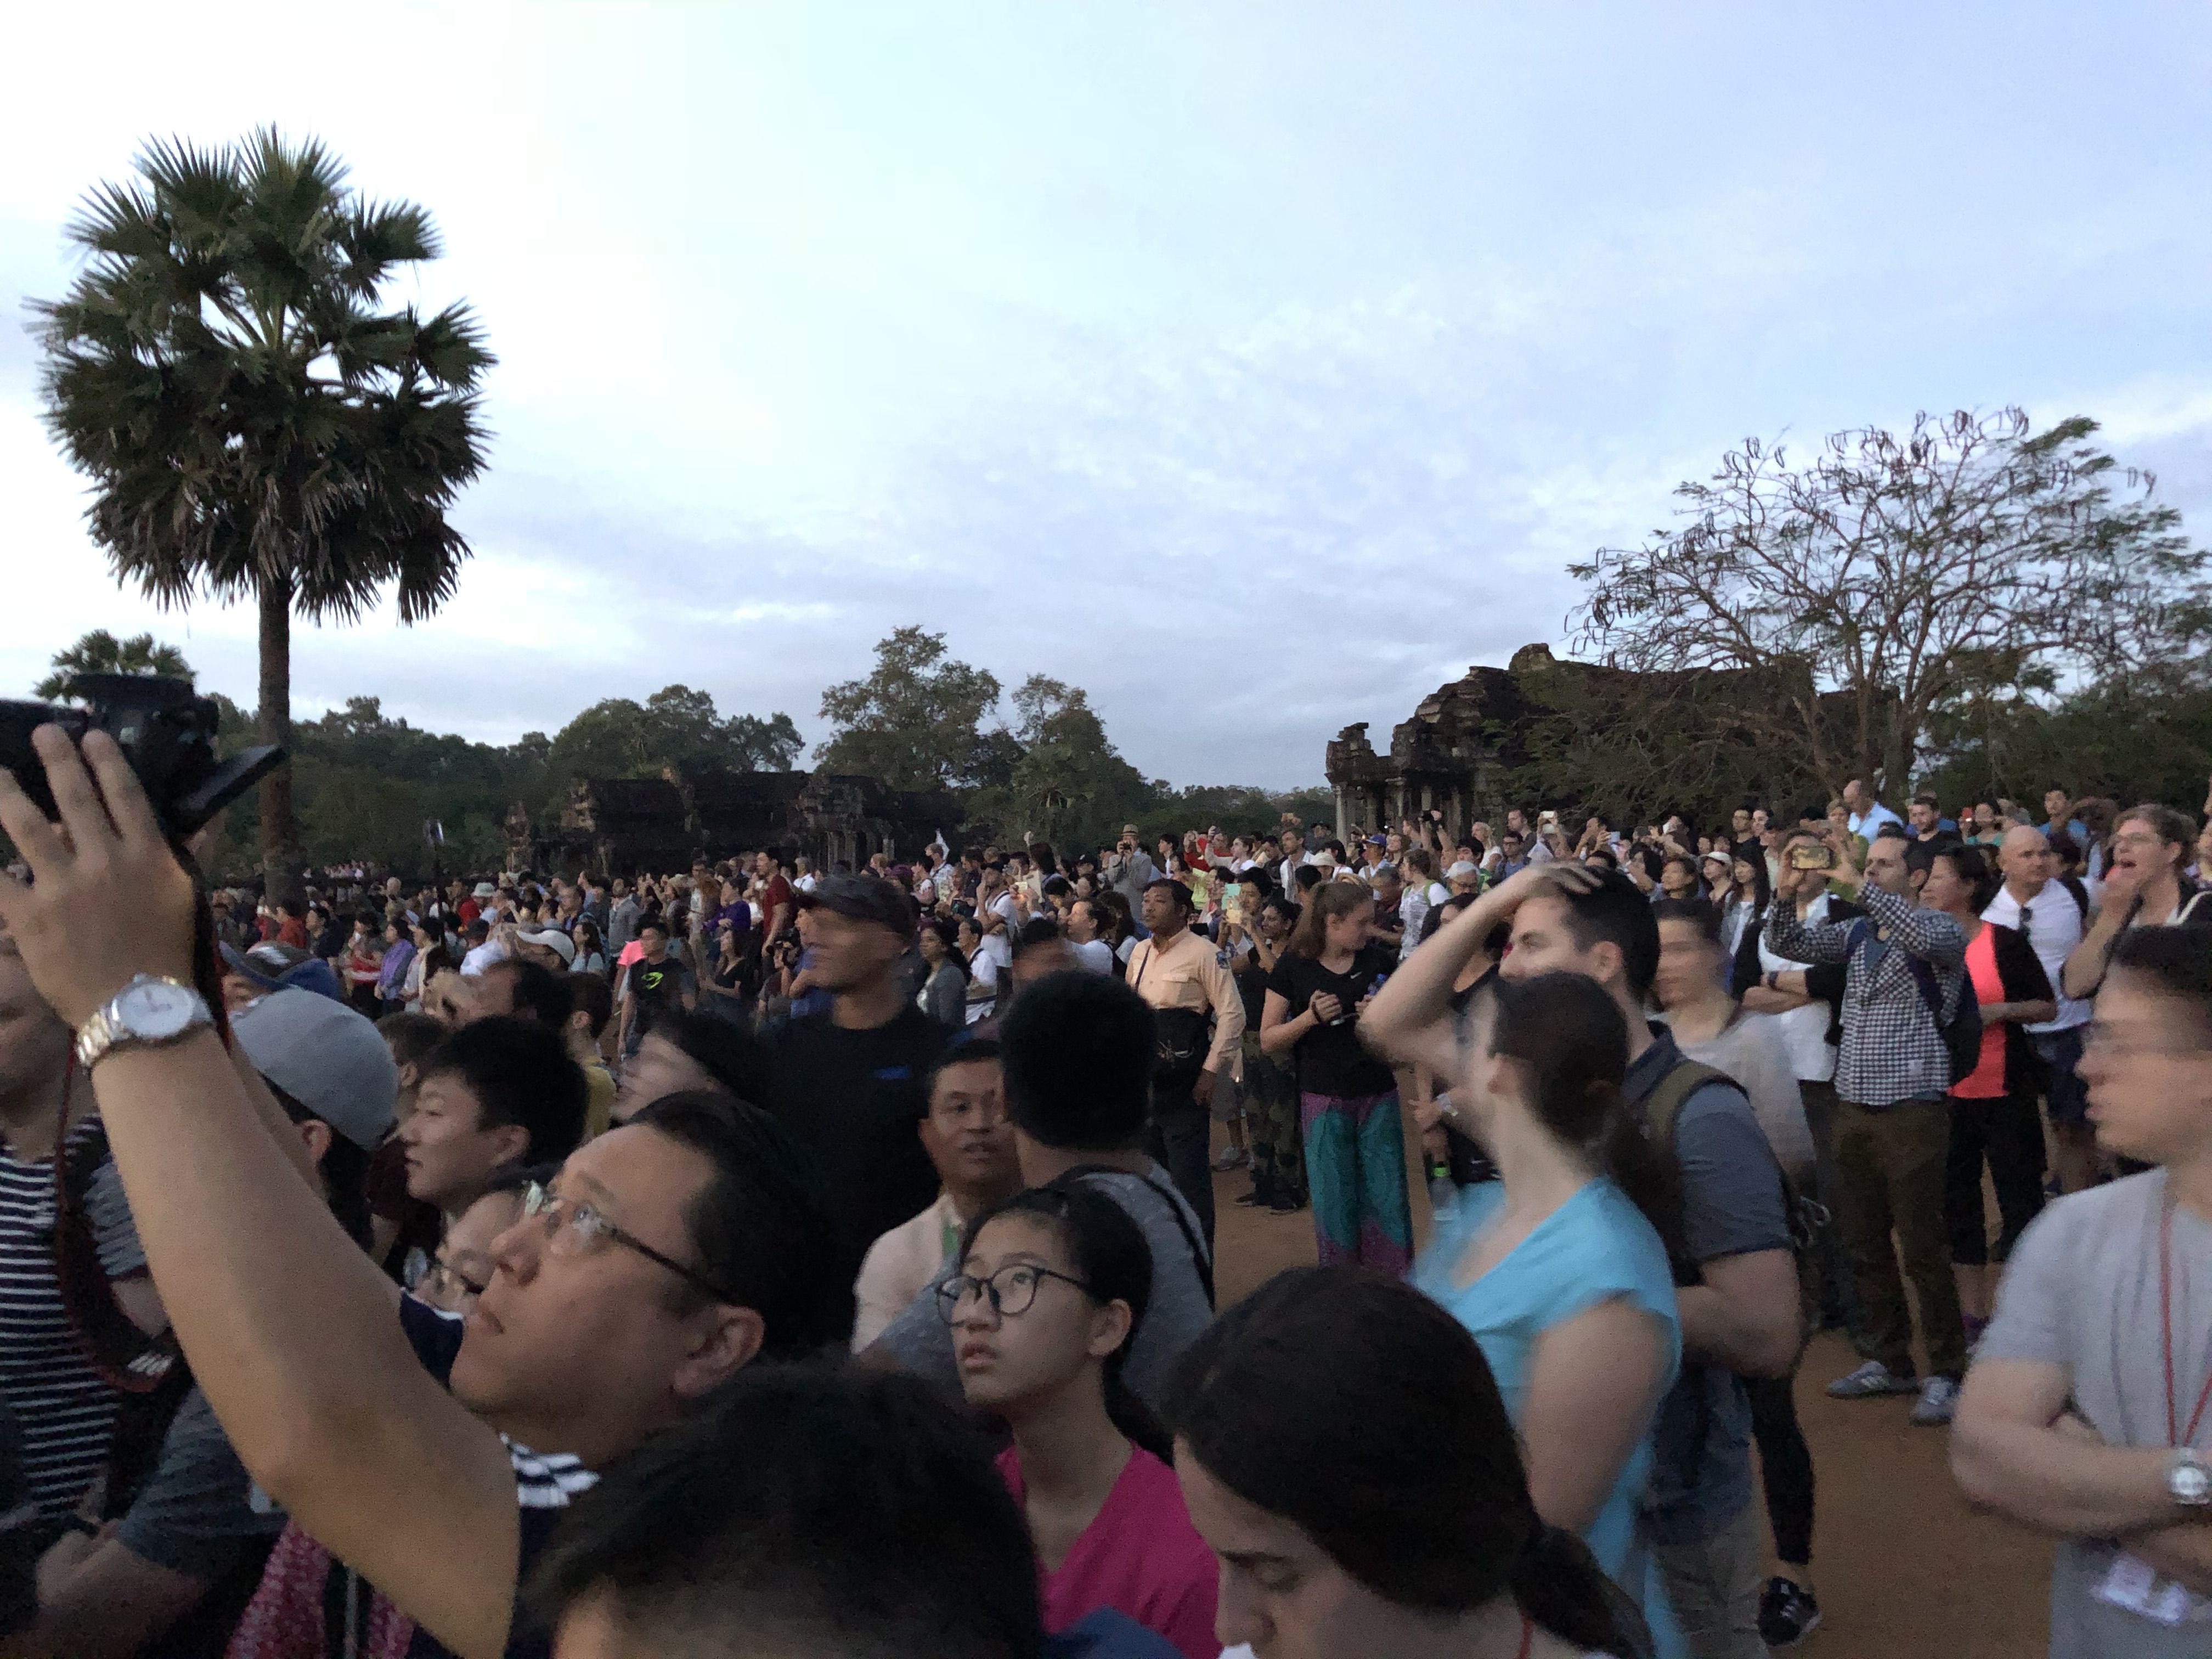 A massive packed crowd of tourists looking over to the left at Angkor Wat, which is out of frame. Some are holding cameras. There's a palm tree in the background.